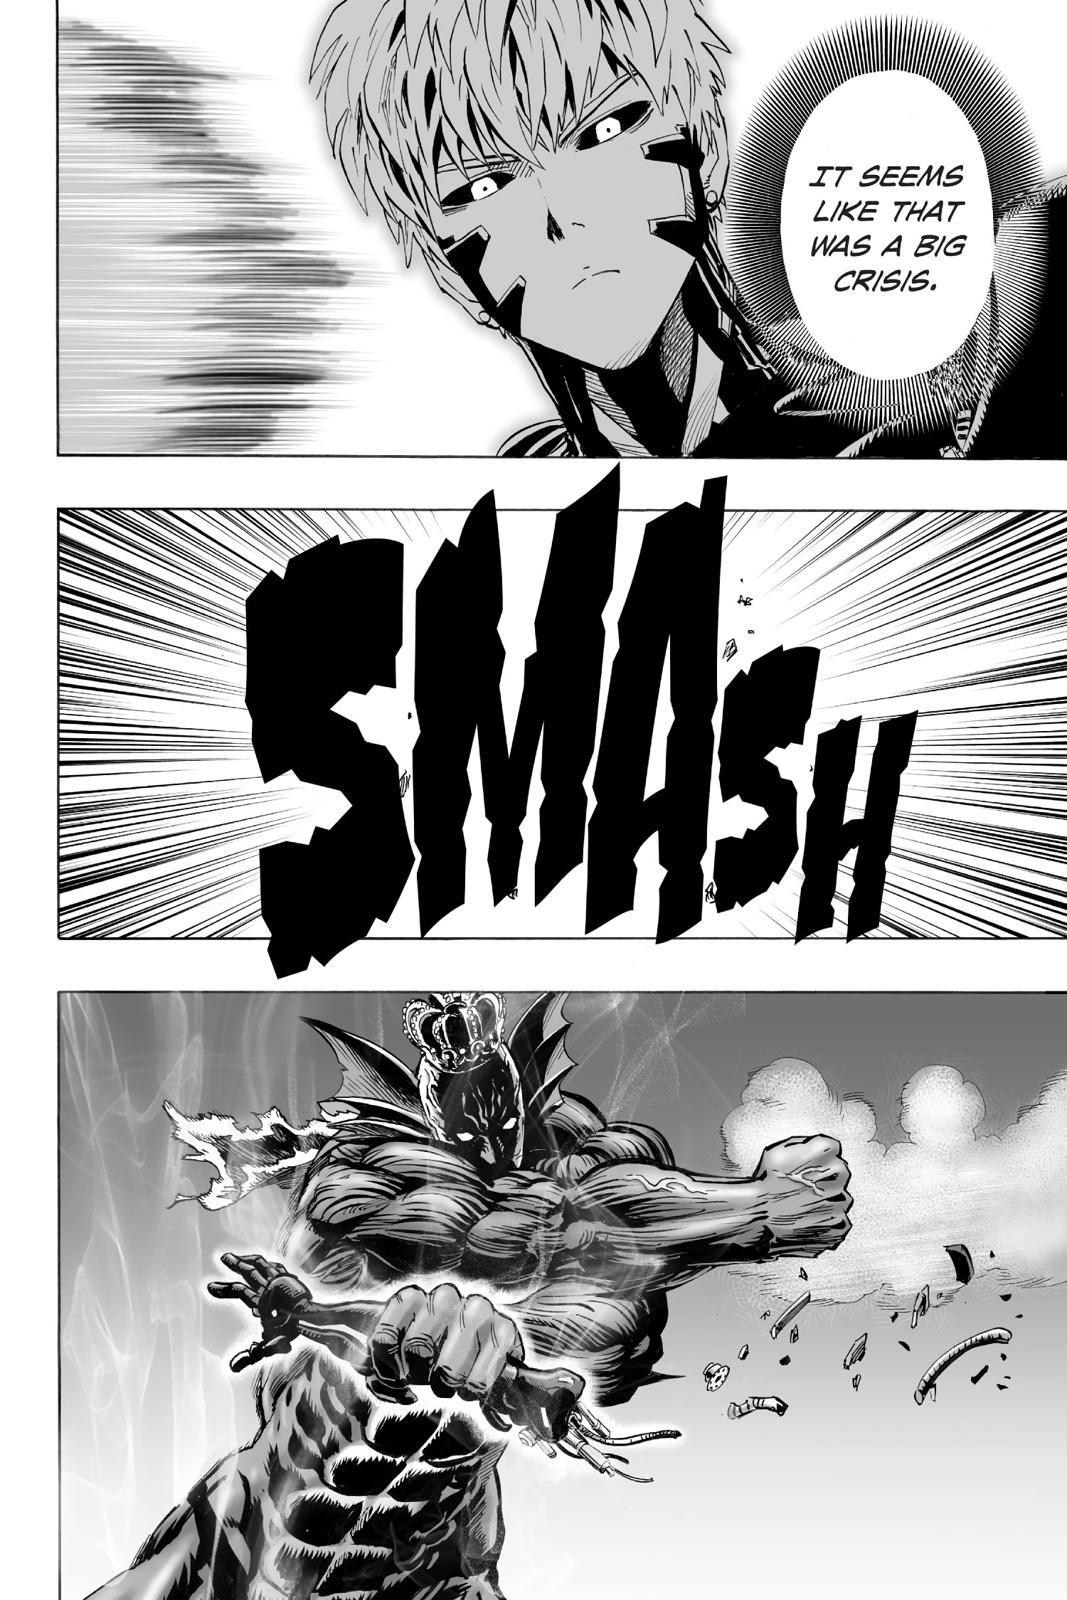 One-Punch Man, Punch 26 image 16